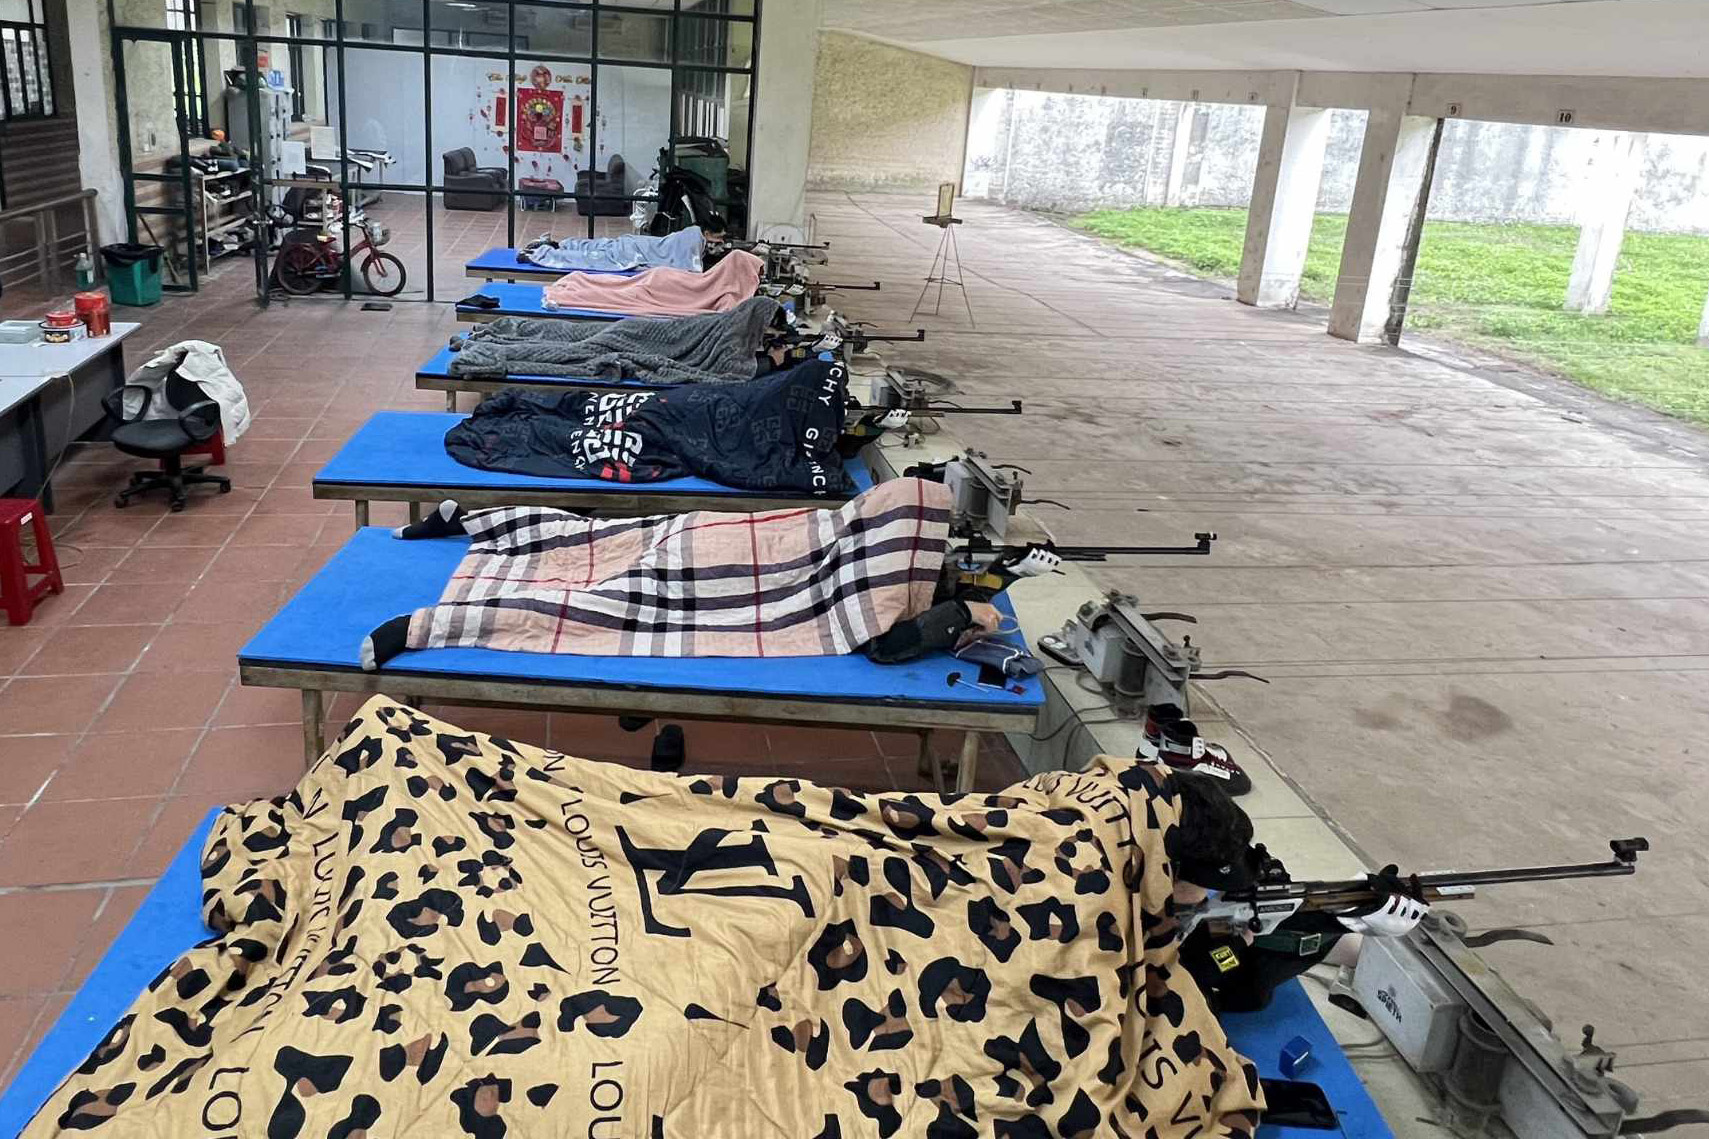 Shooters bundle up in blankets amid frigid weather in northern Vietnam